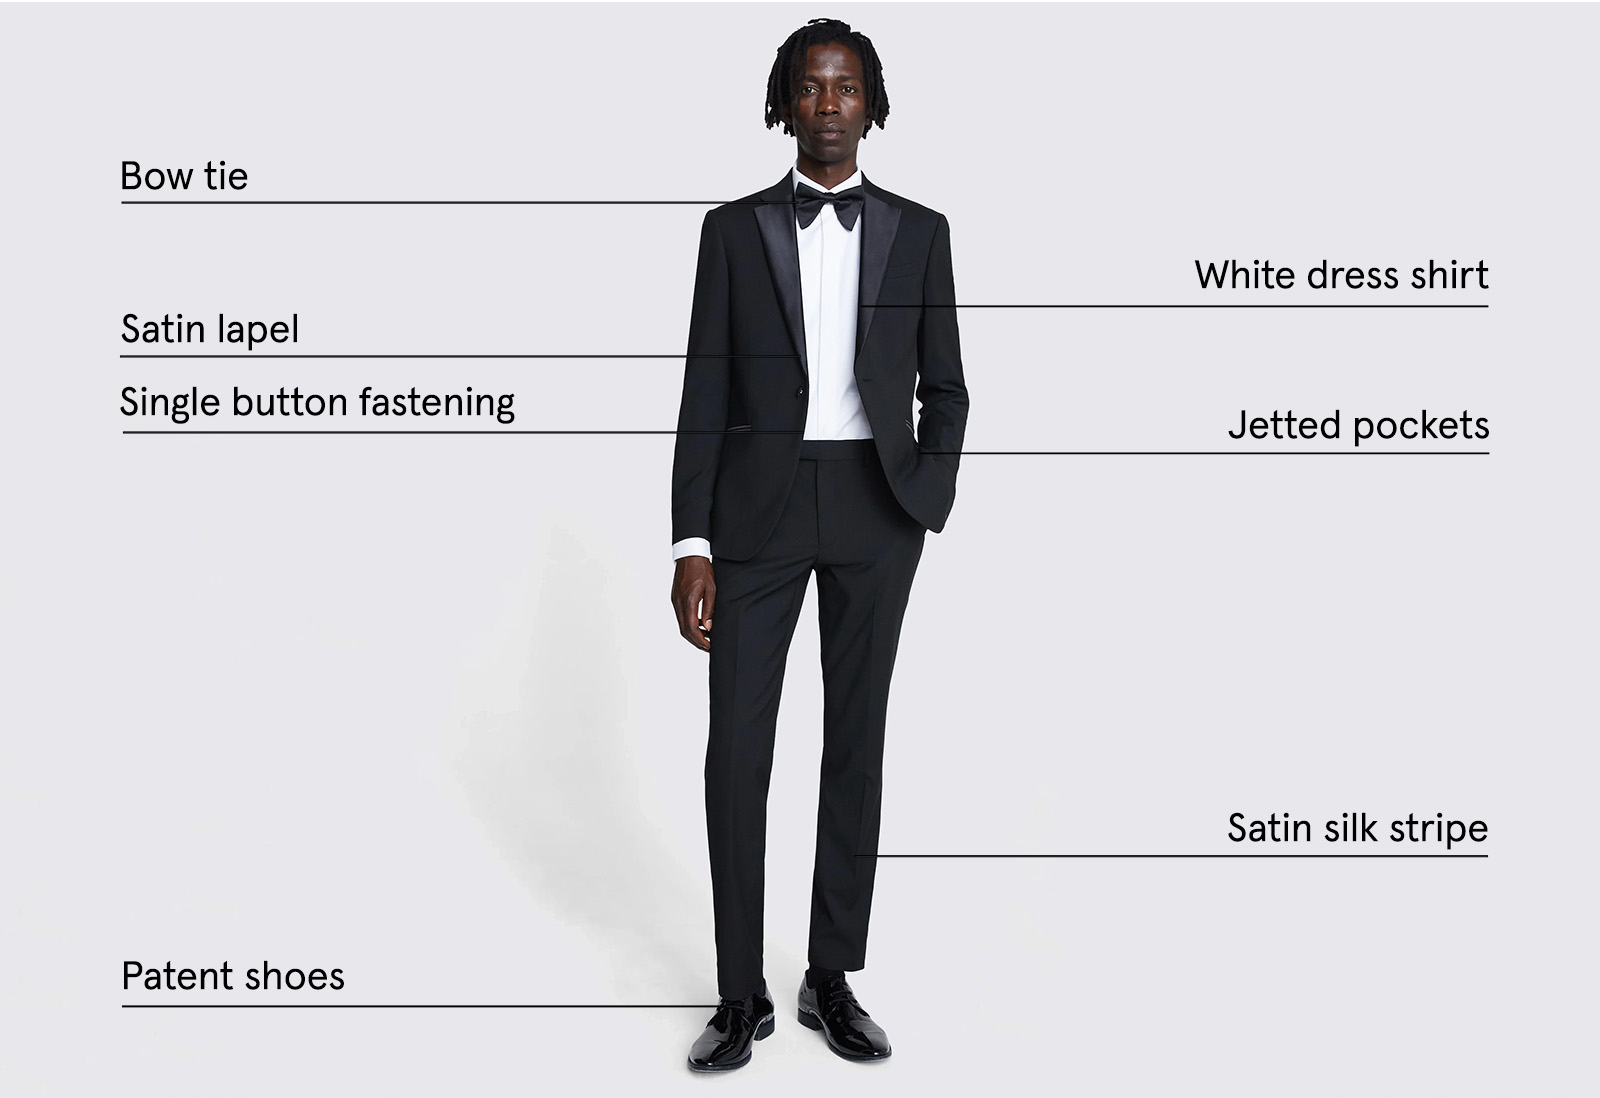 Tuxedo vs suit – what’s the difference?